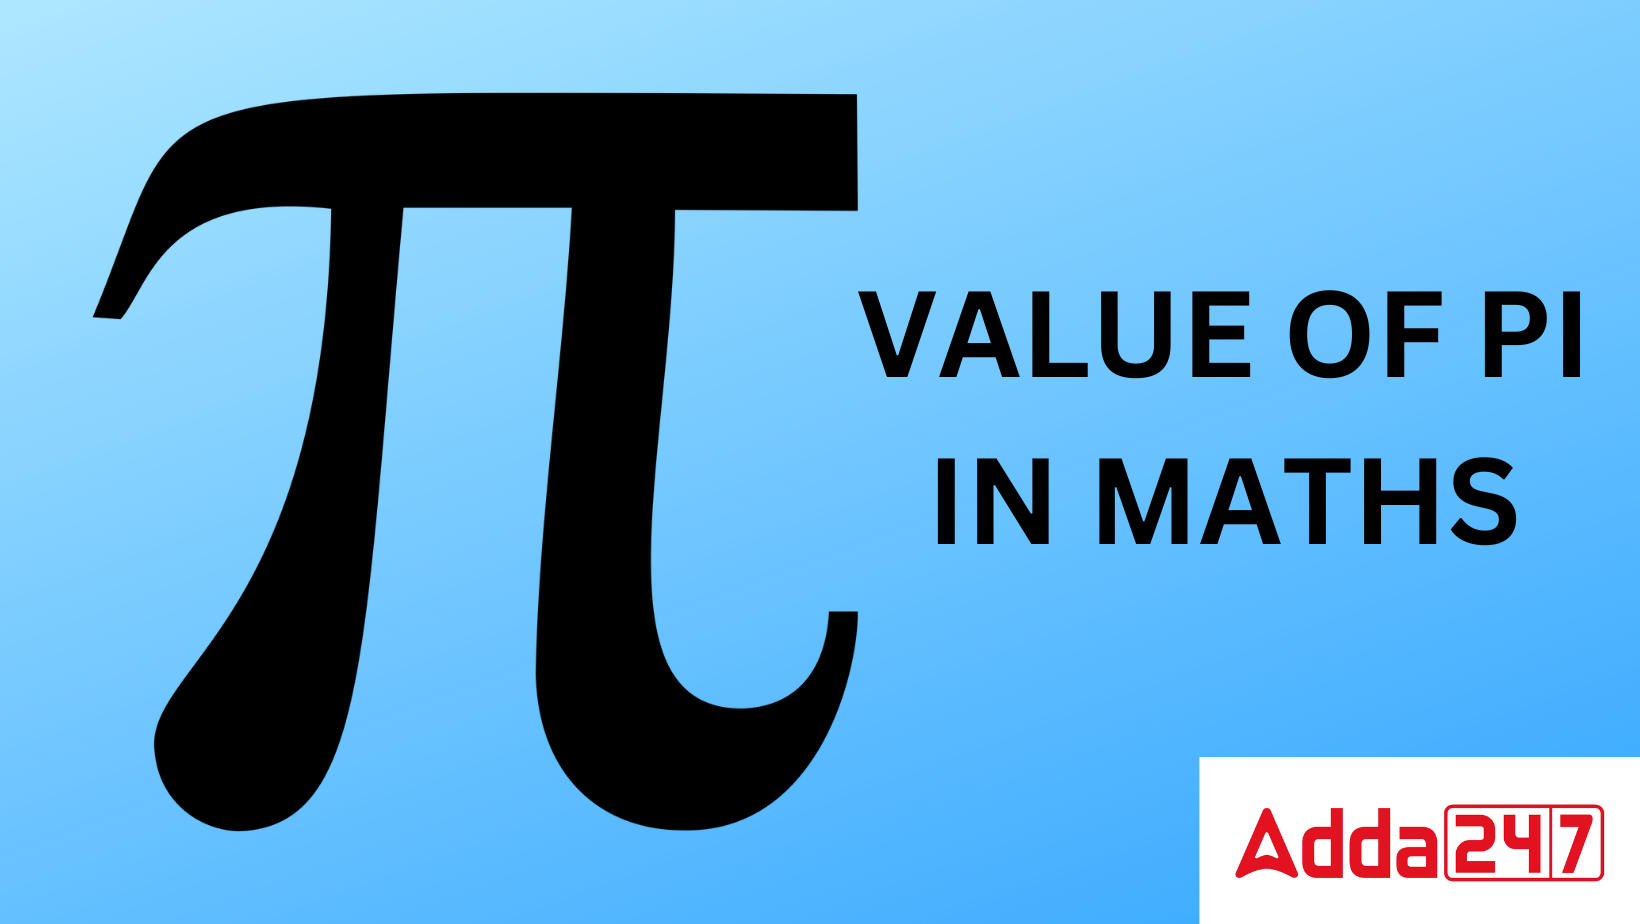 VALUE OF PI IN MATHS